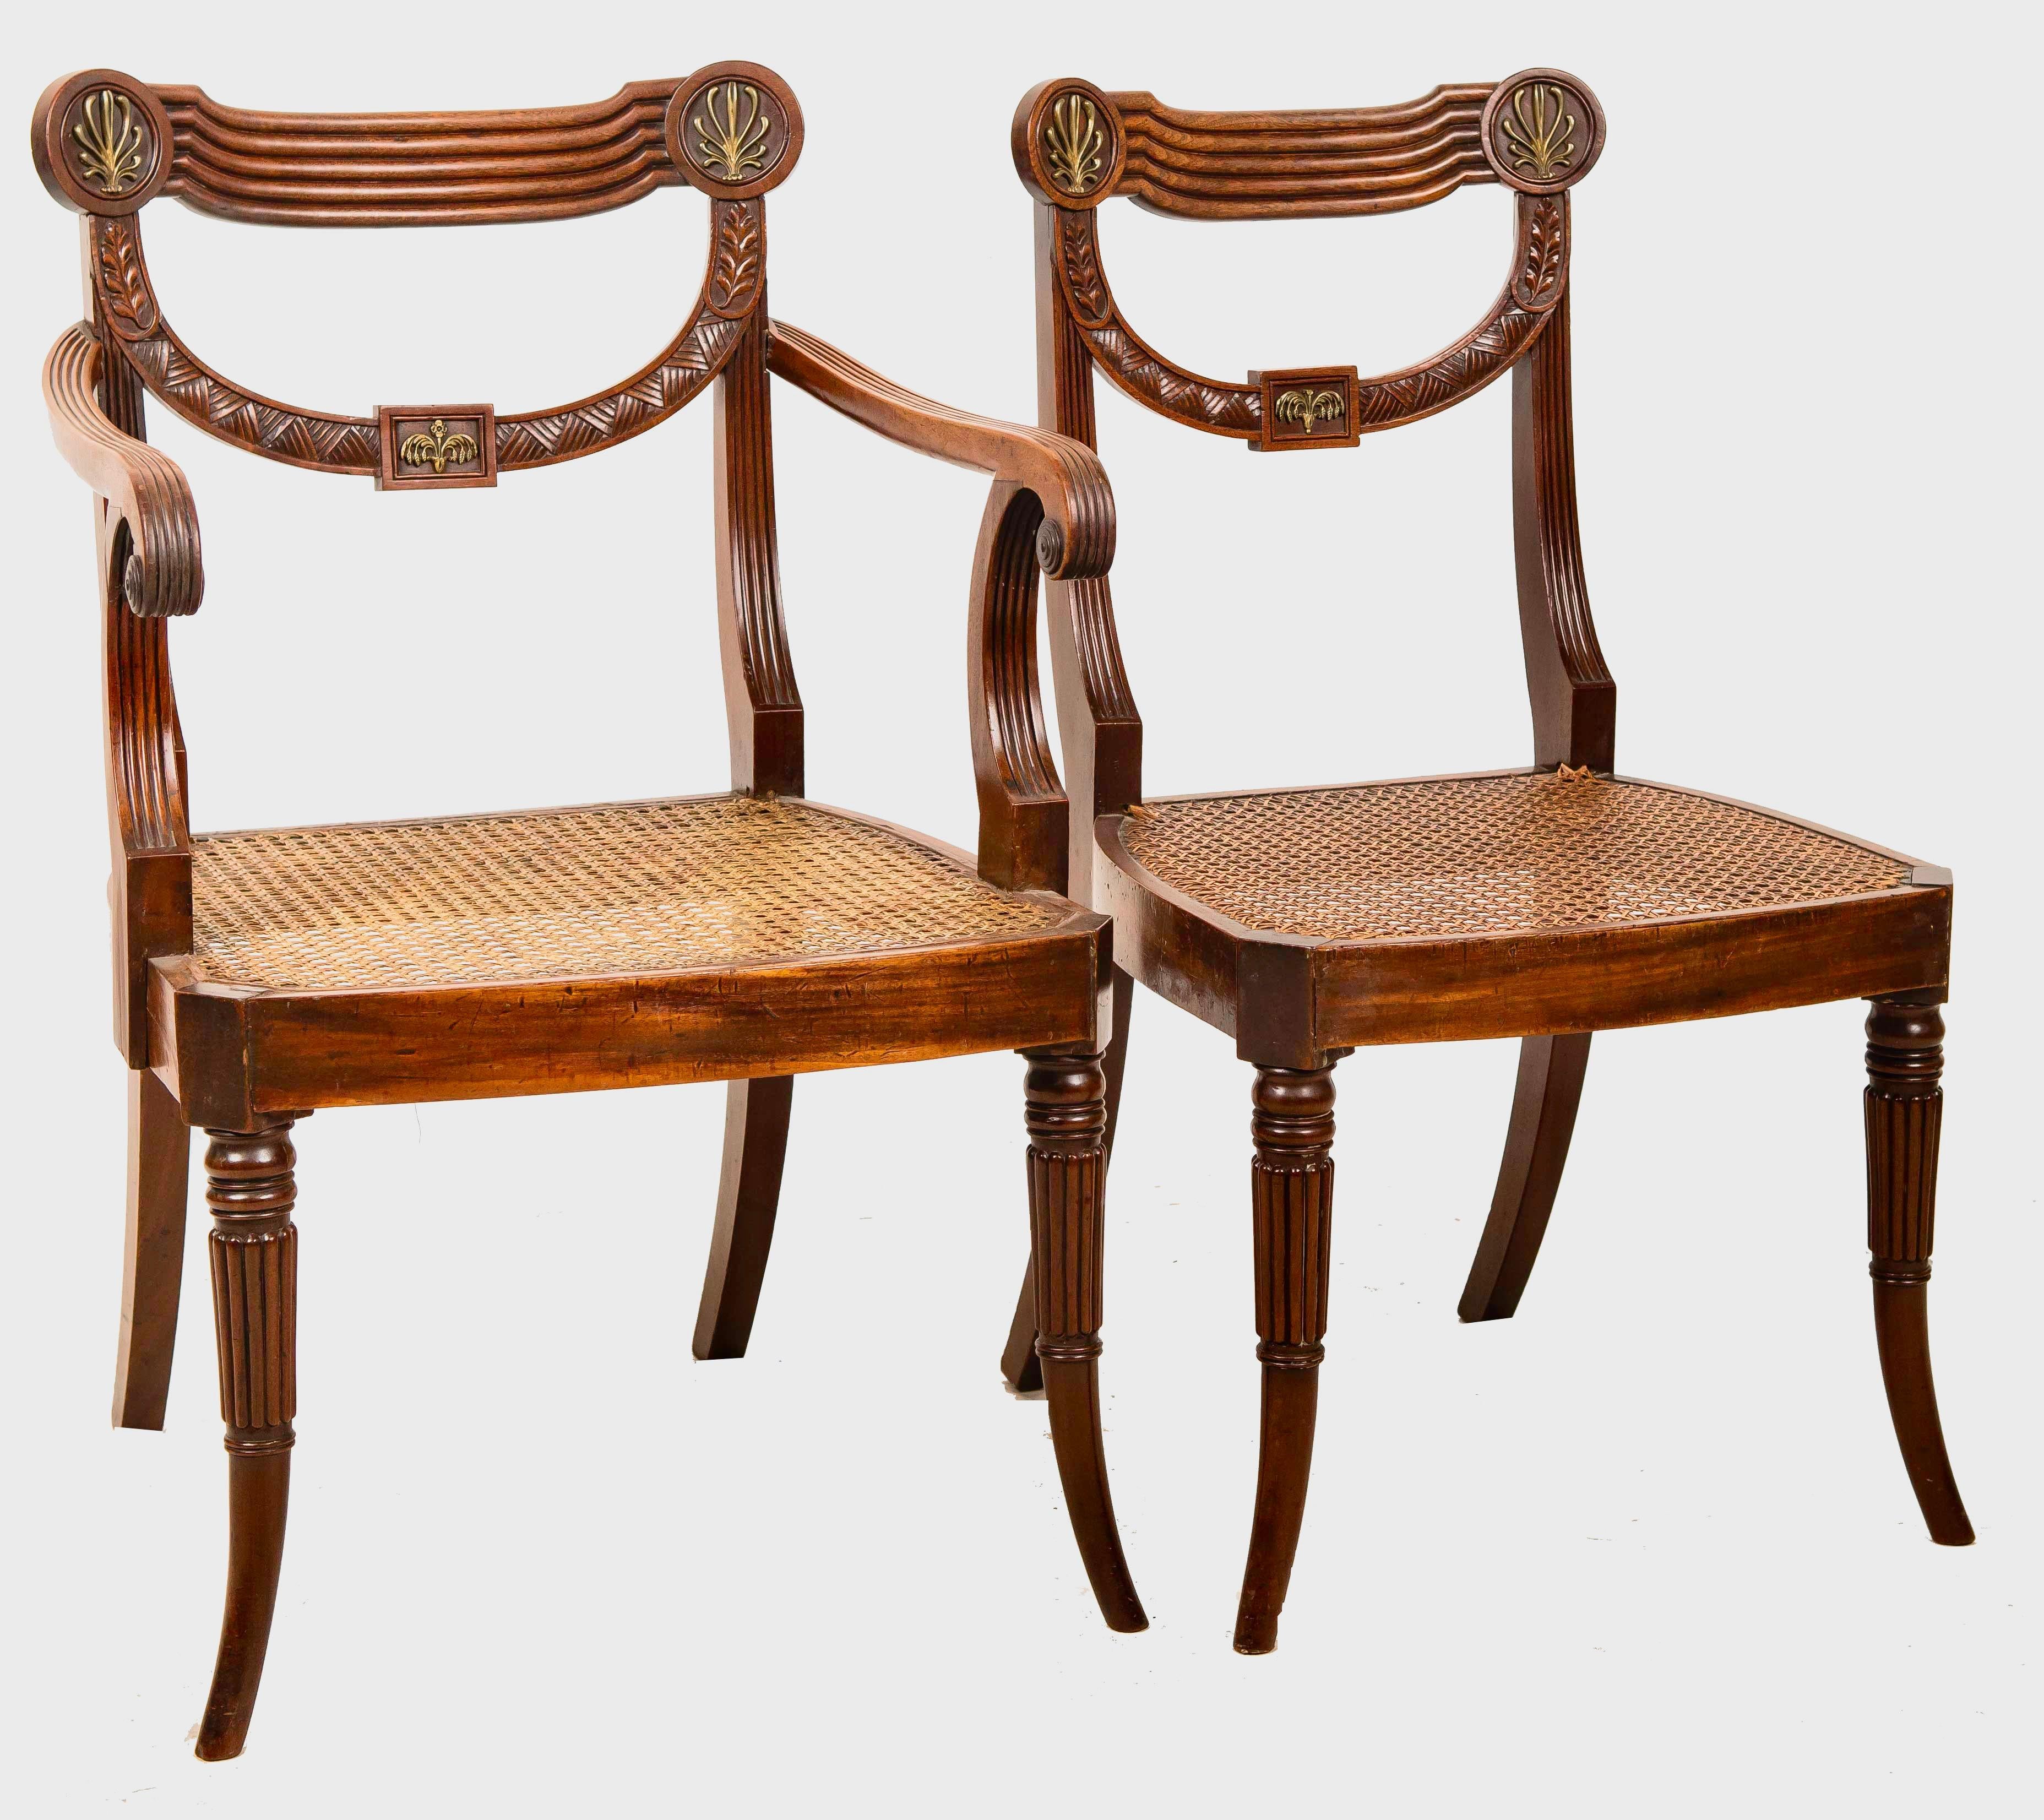 Set of ten rare and fine period Regency chairs in carved mahogany. Neoclassical draped form with applied ormolu mounts of Athemion and wheat sheaves. Two armchairs and eight sides. Beautiful choice of mahogany. Maker unknown but in keeping with